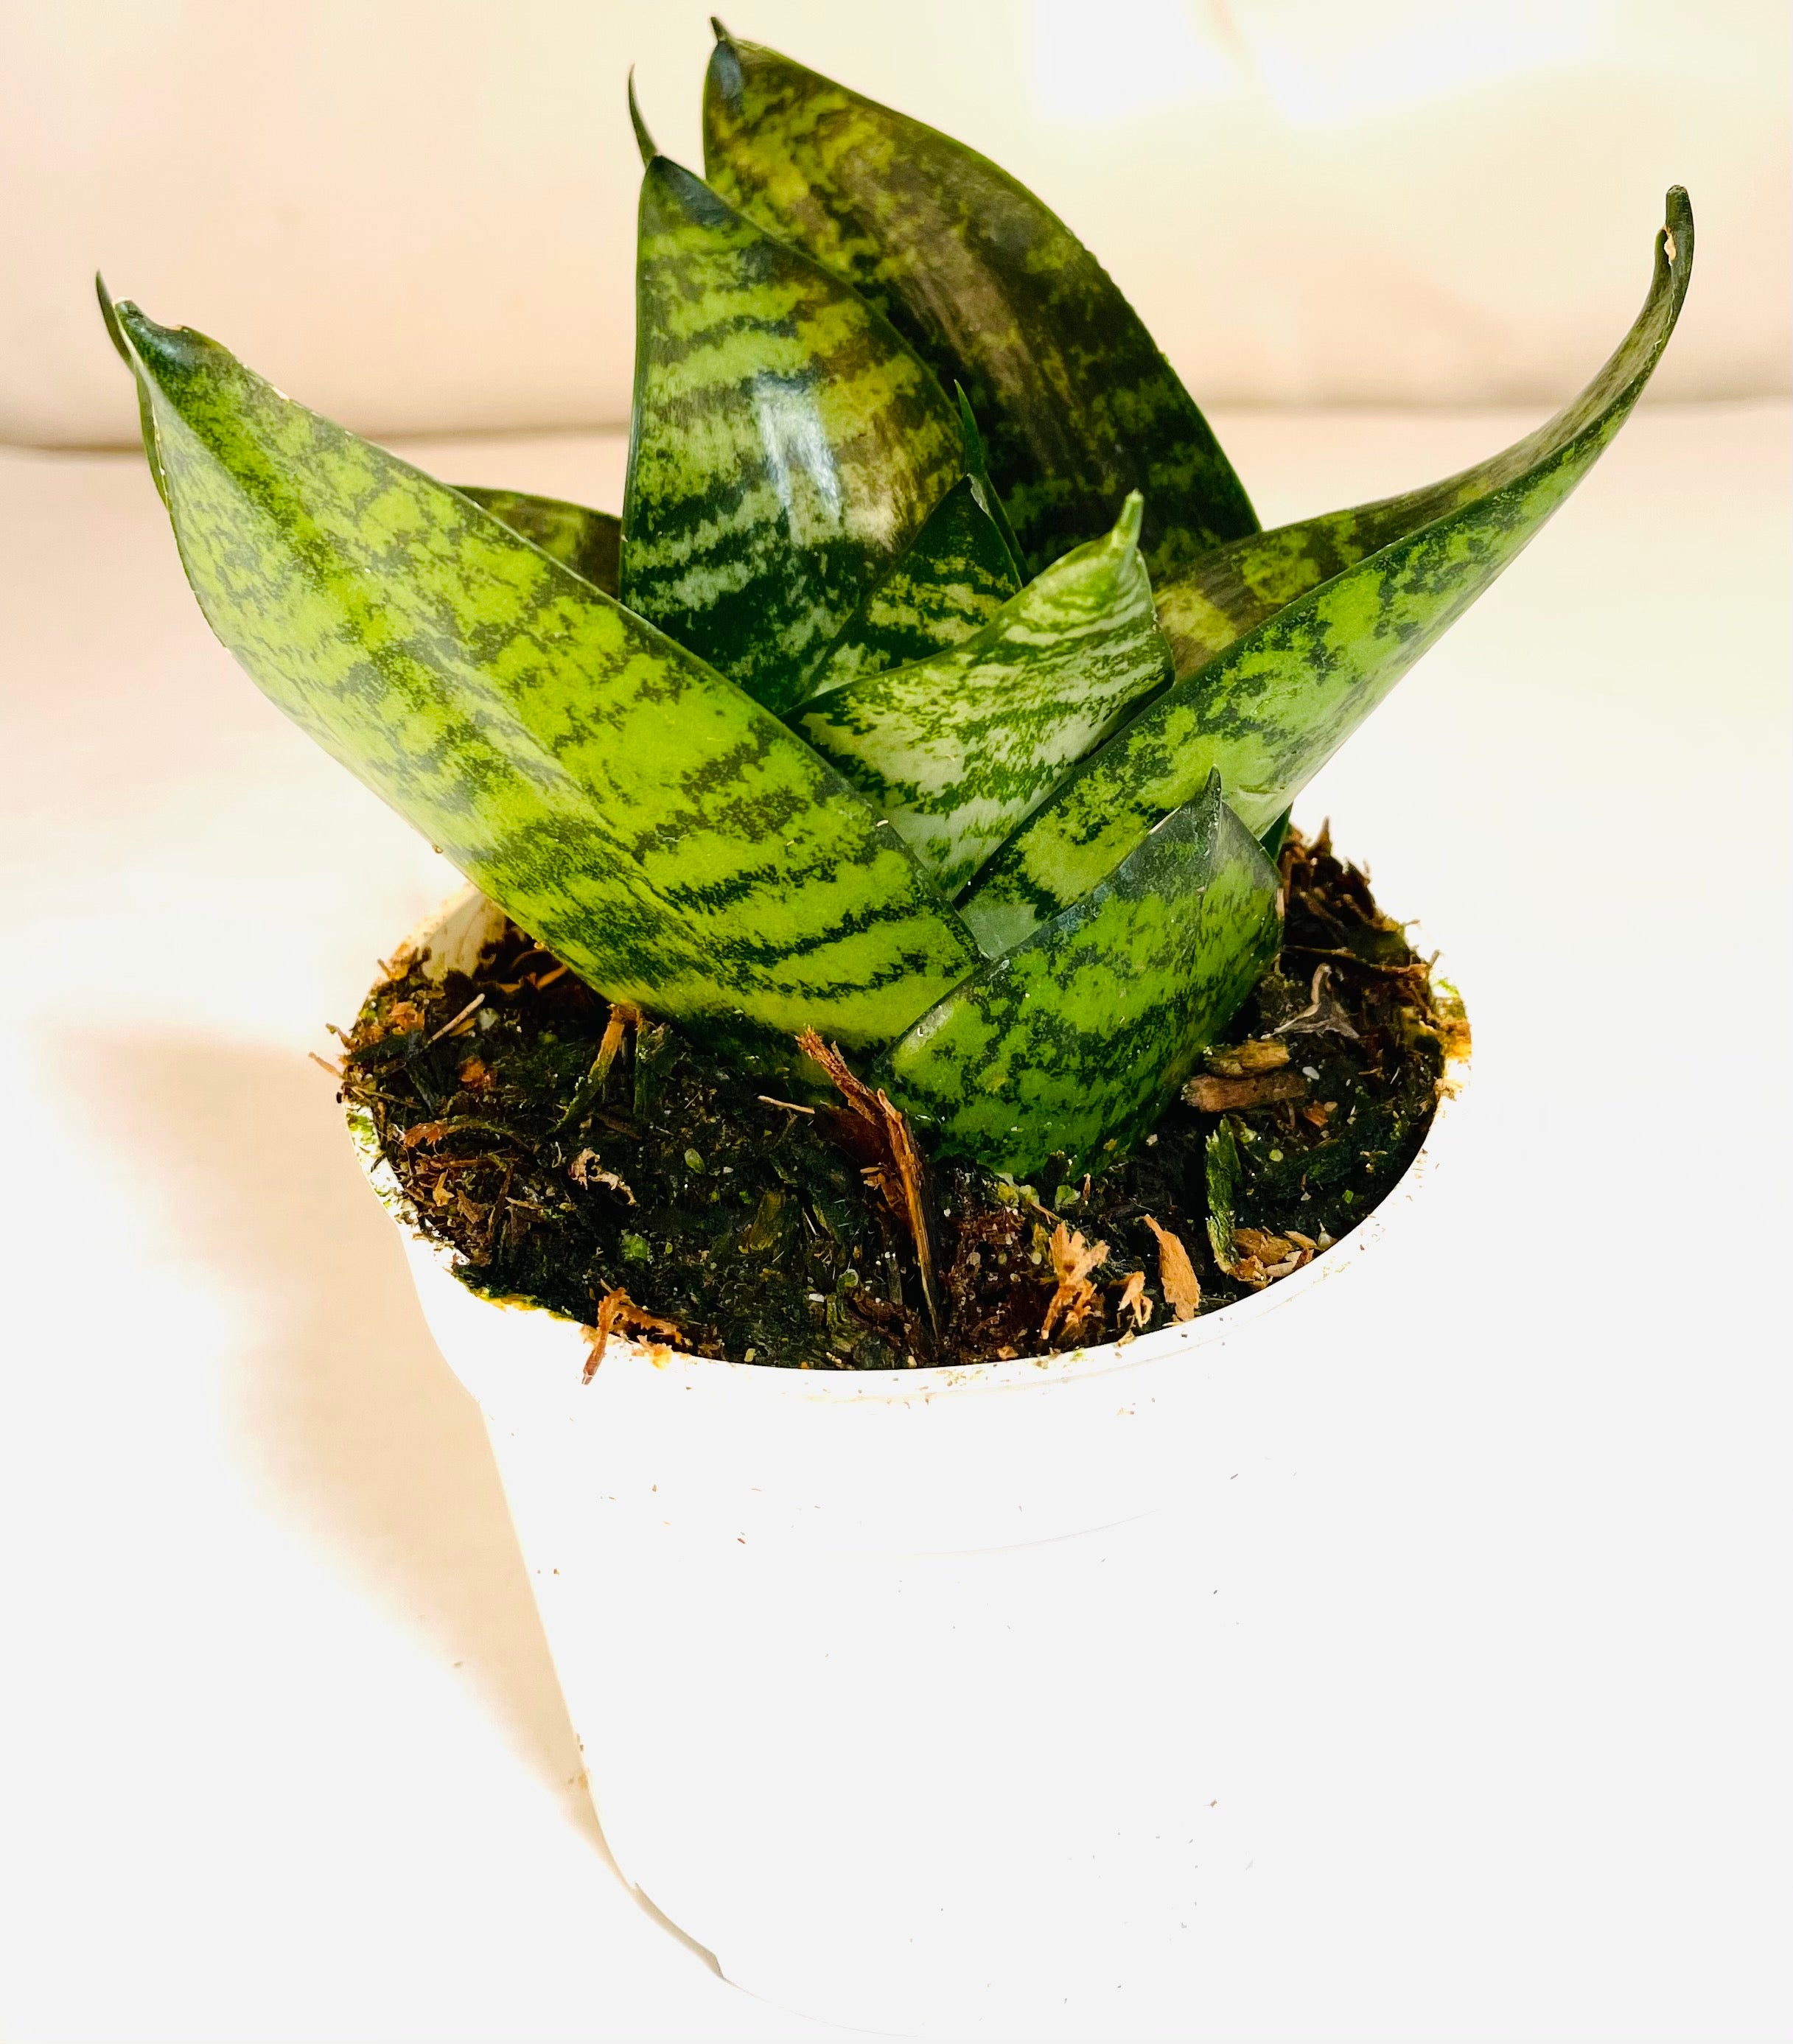 A semi-rosette forming plant, with short leaves that flare out from a central base. The chunky leaves feature horizontal dark green and light green striping.